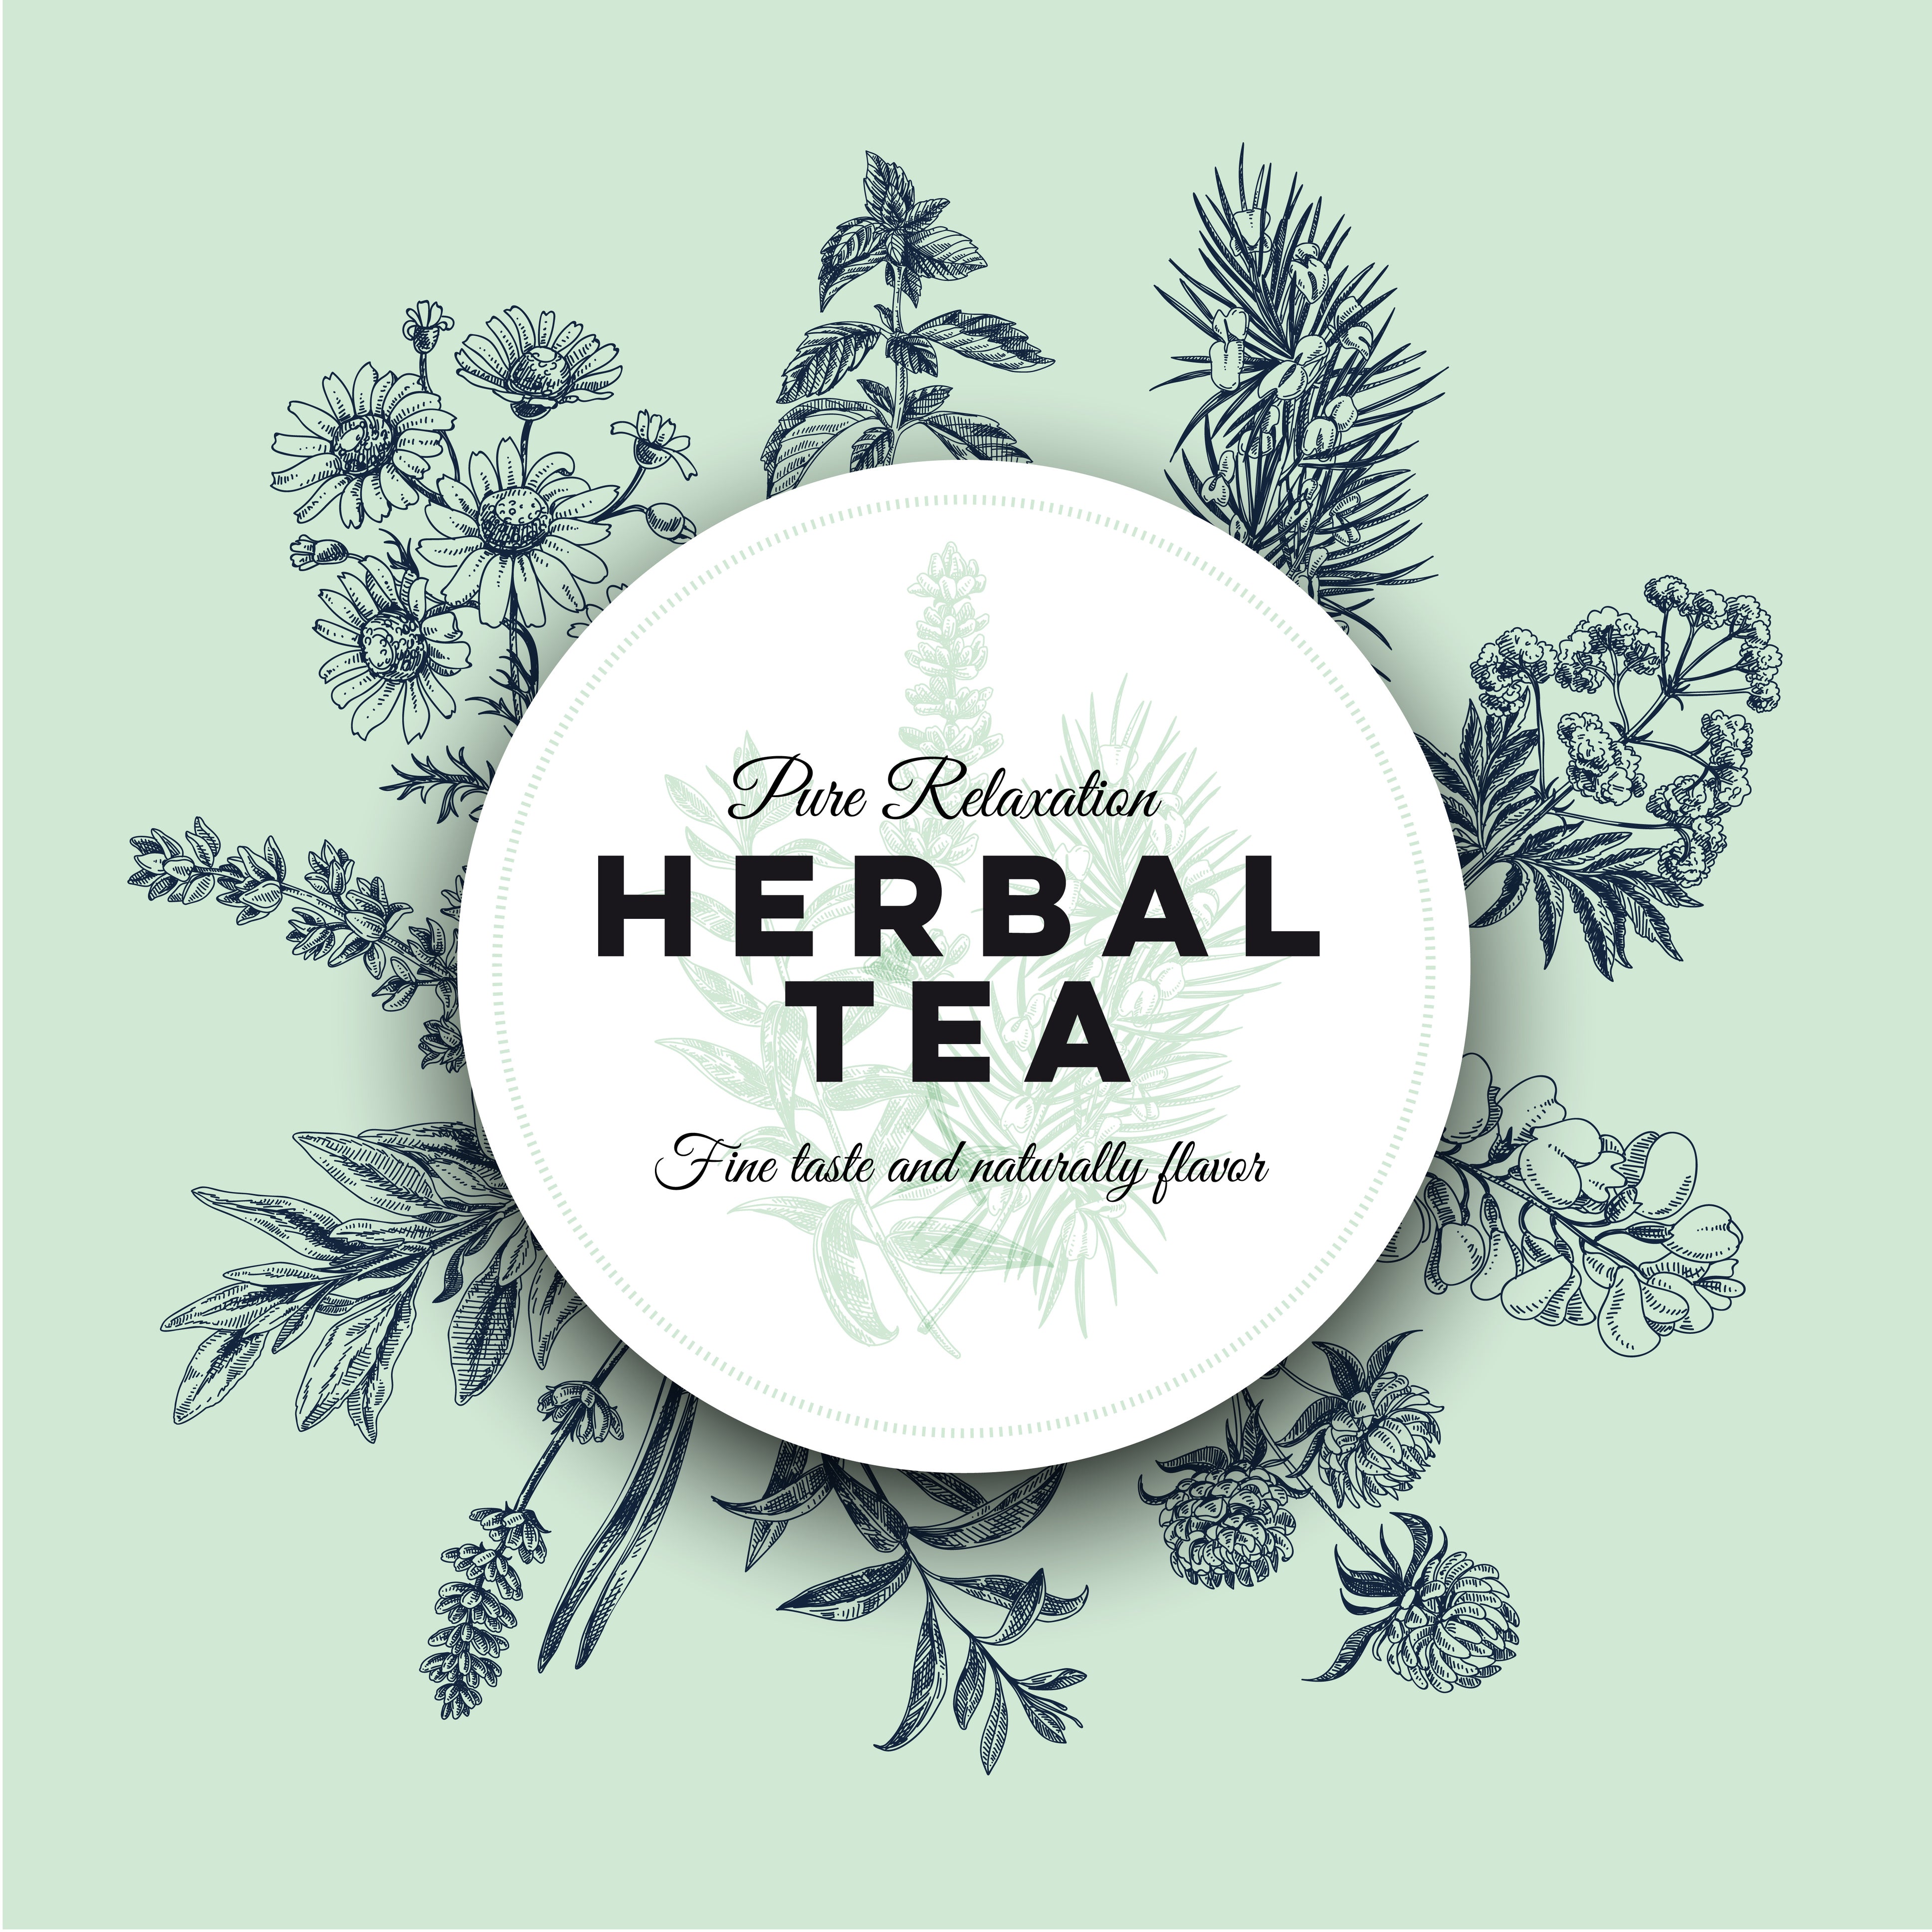 7 Healing Herbal Teas You Can Forage For Yourself